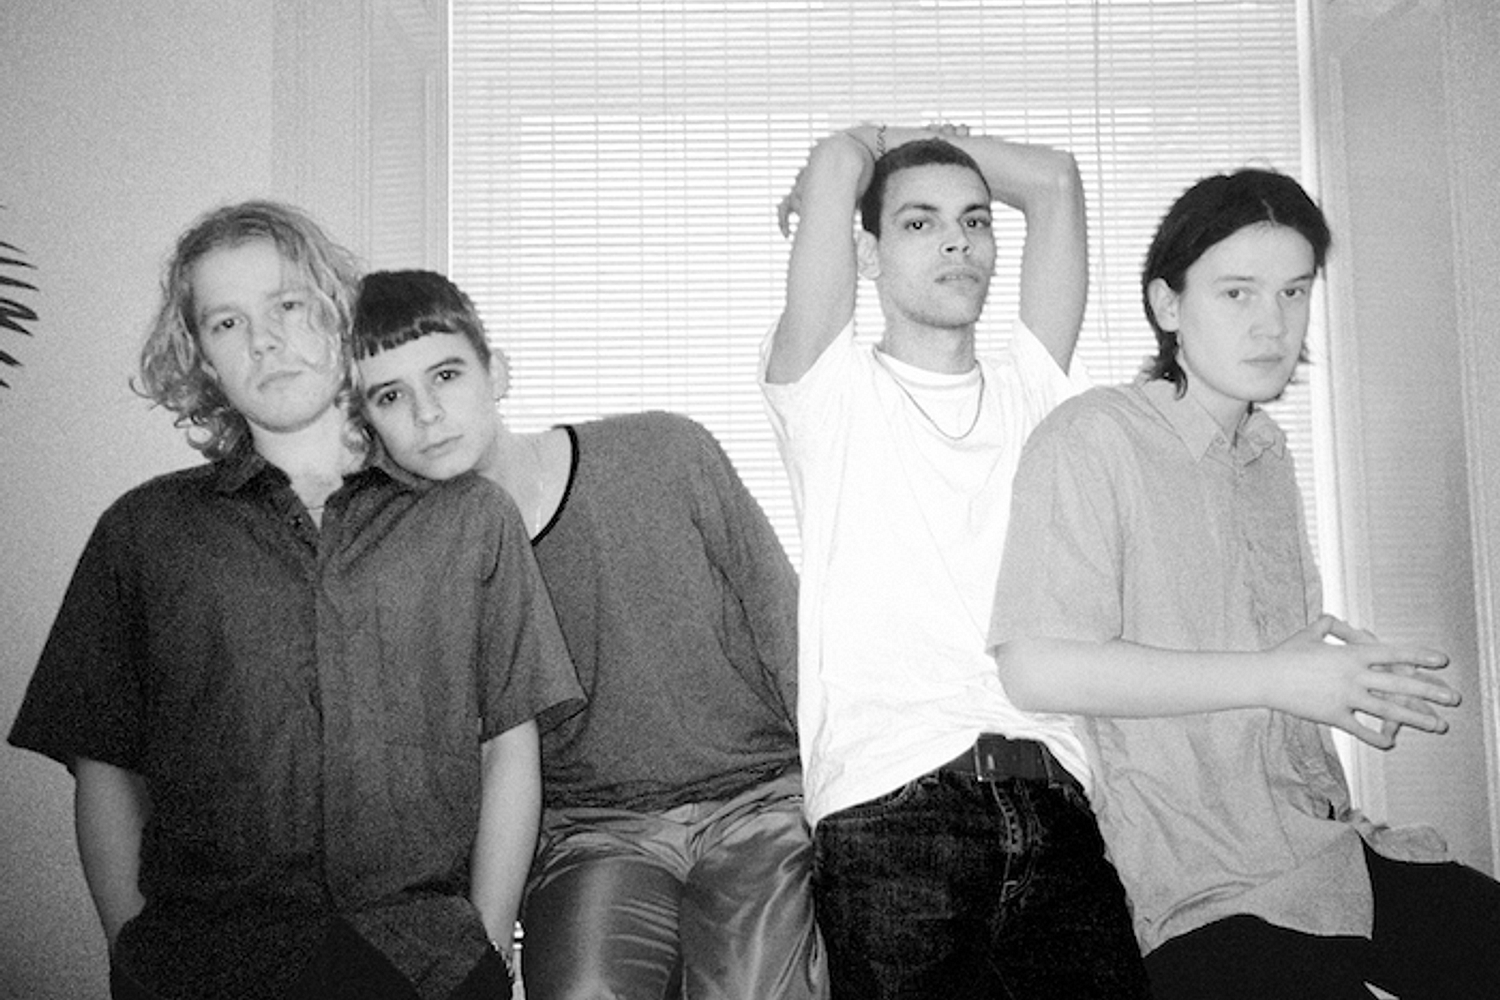 LISS share new track ‘Leave Me On The Floor’